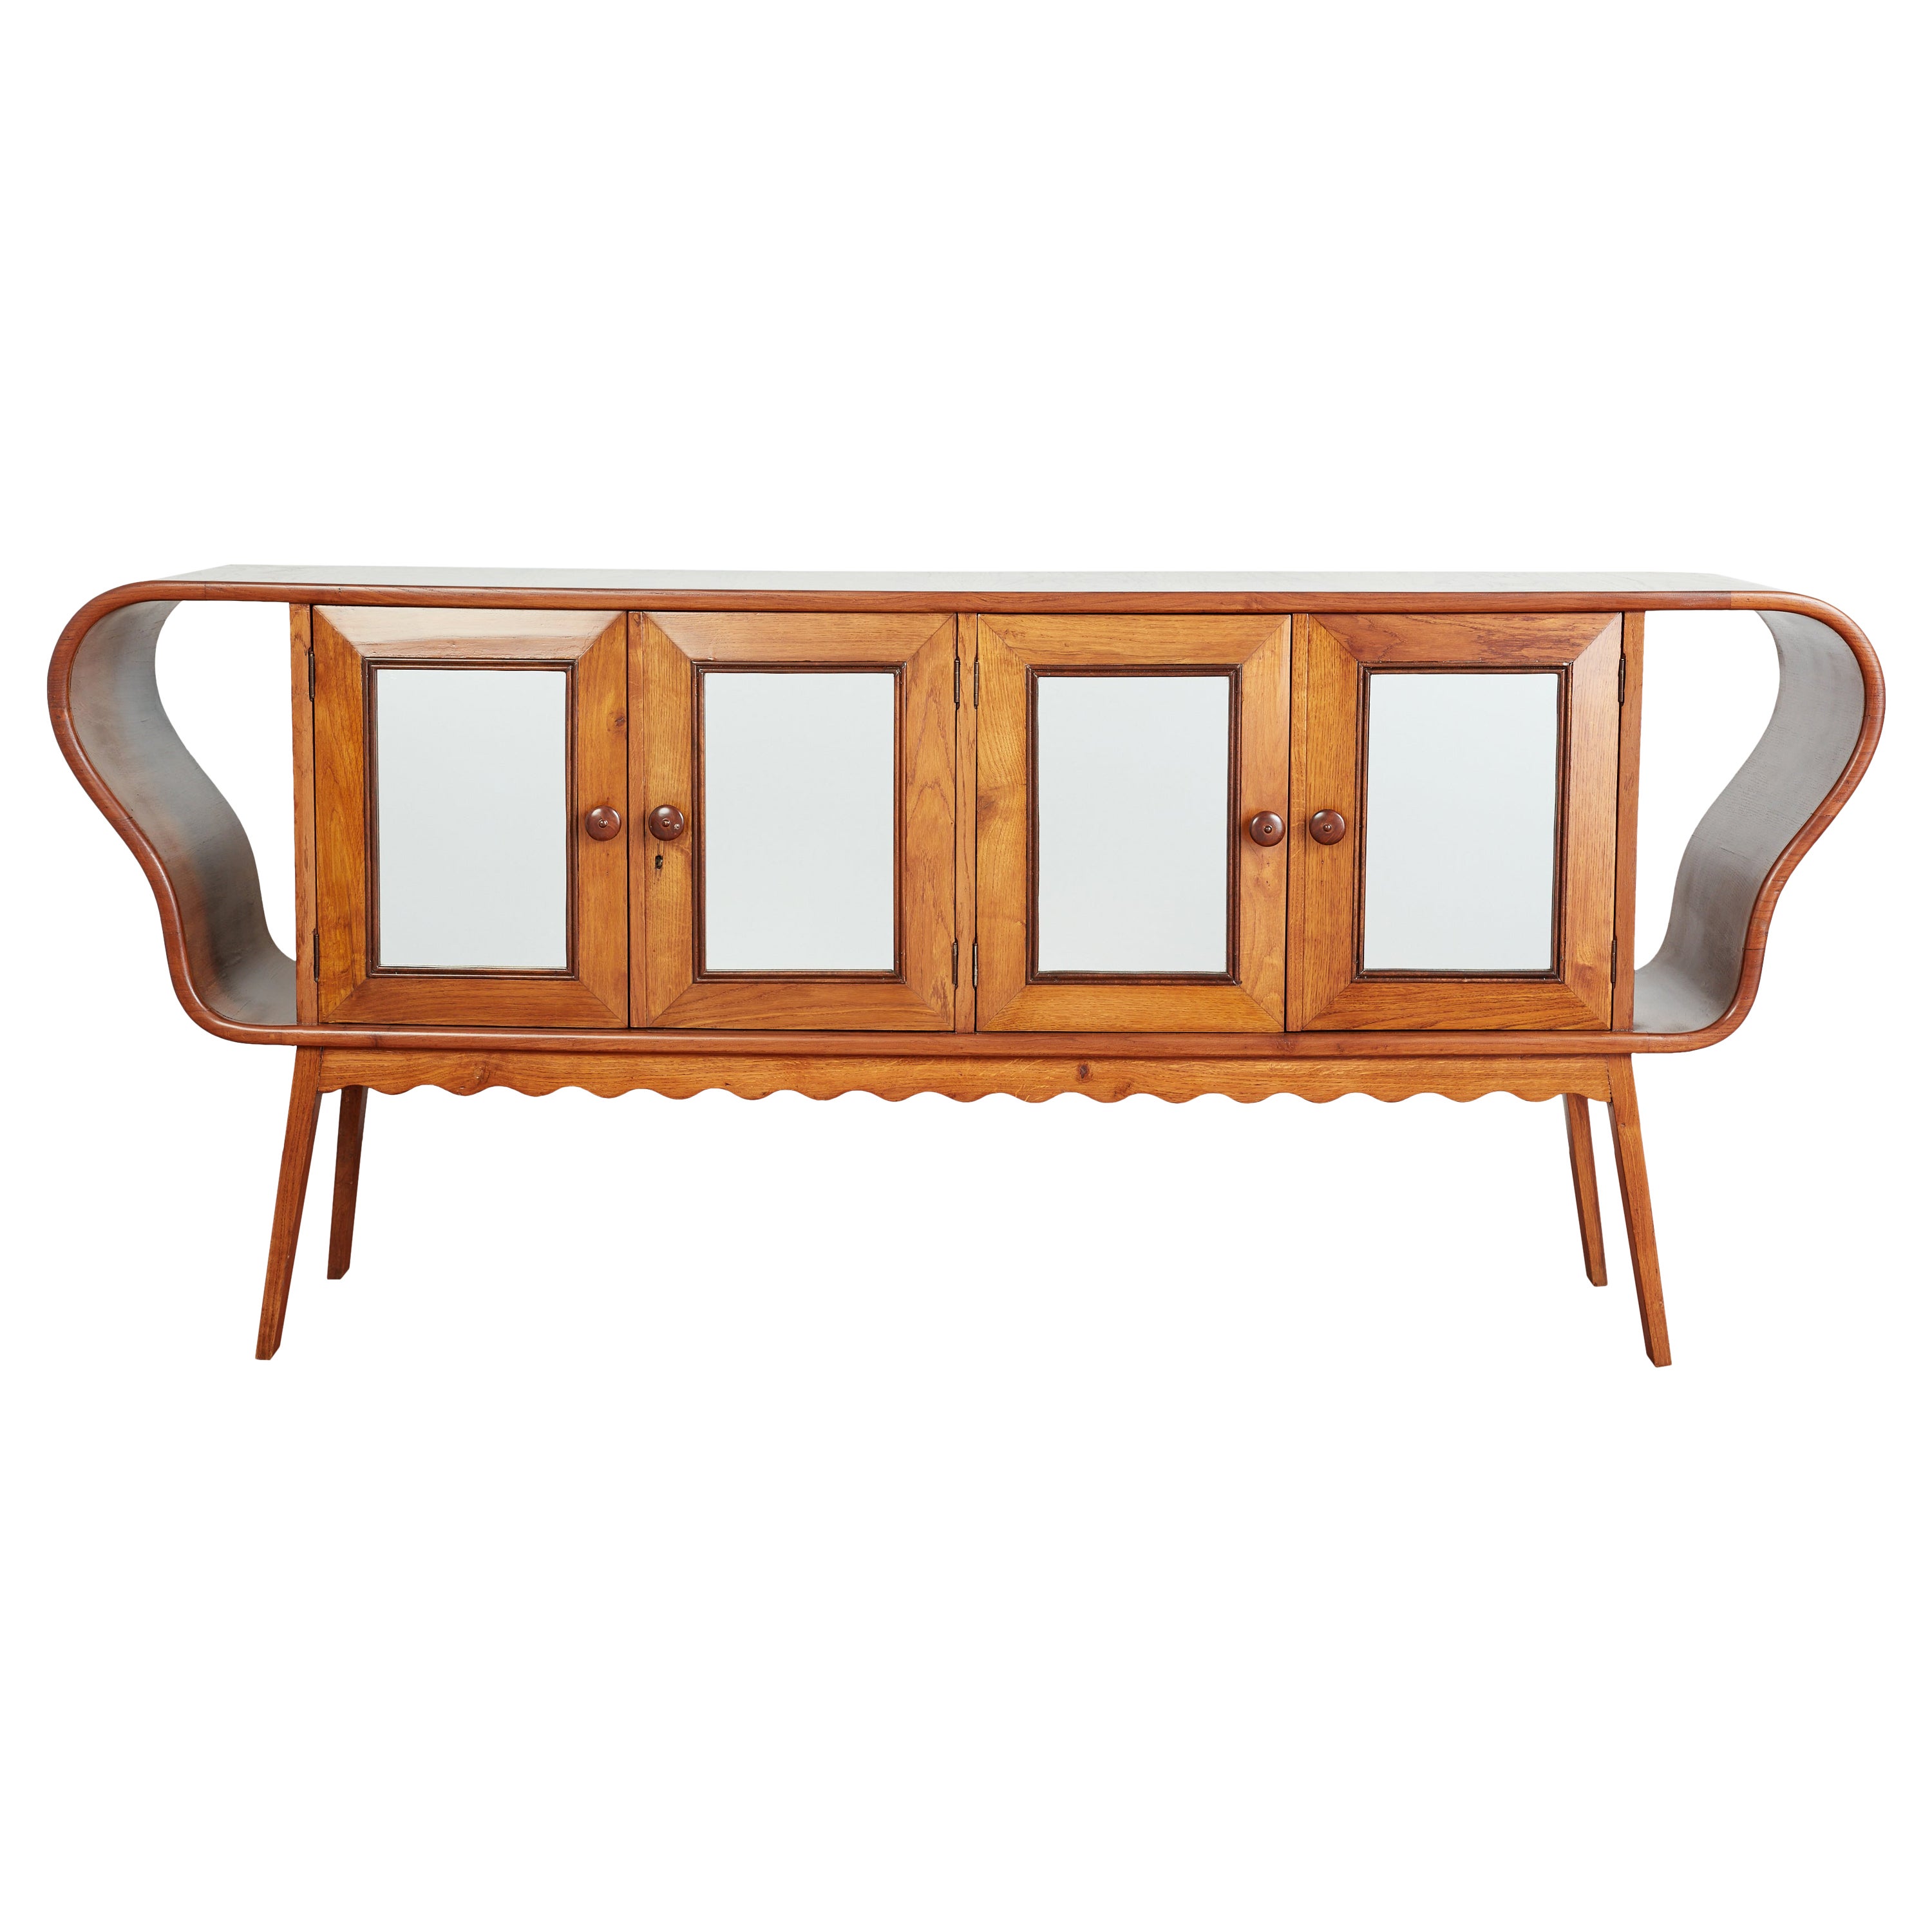 Wooden Sideboard by G. Pulitzer